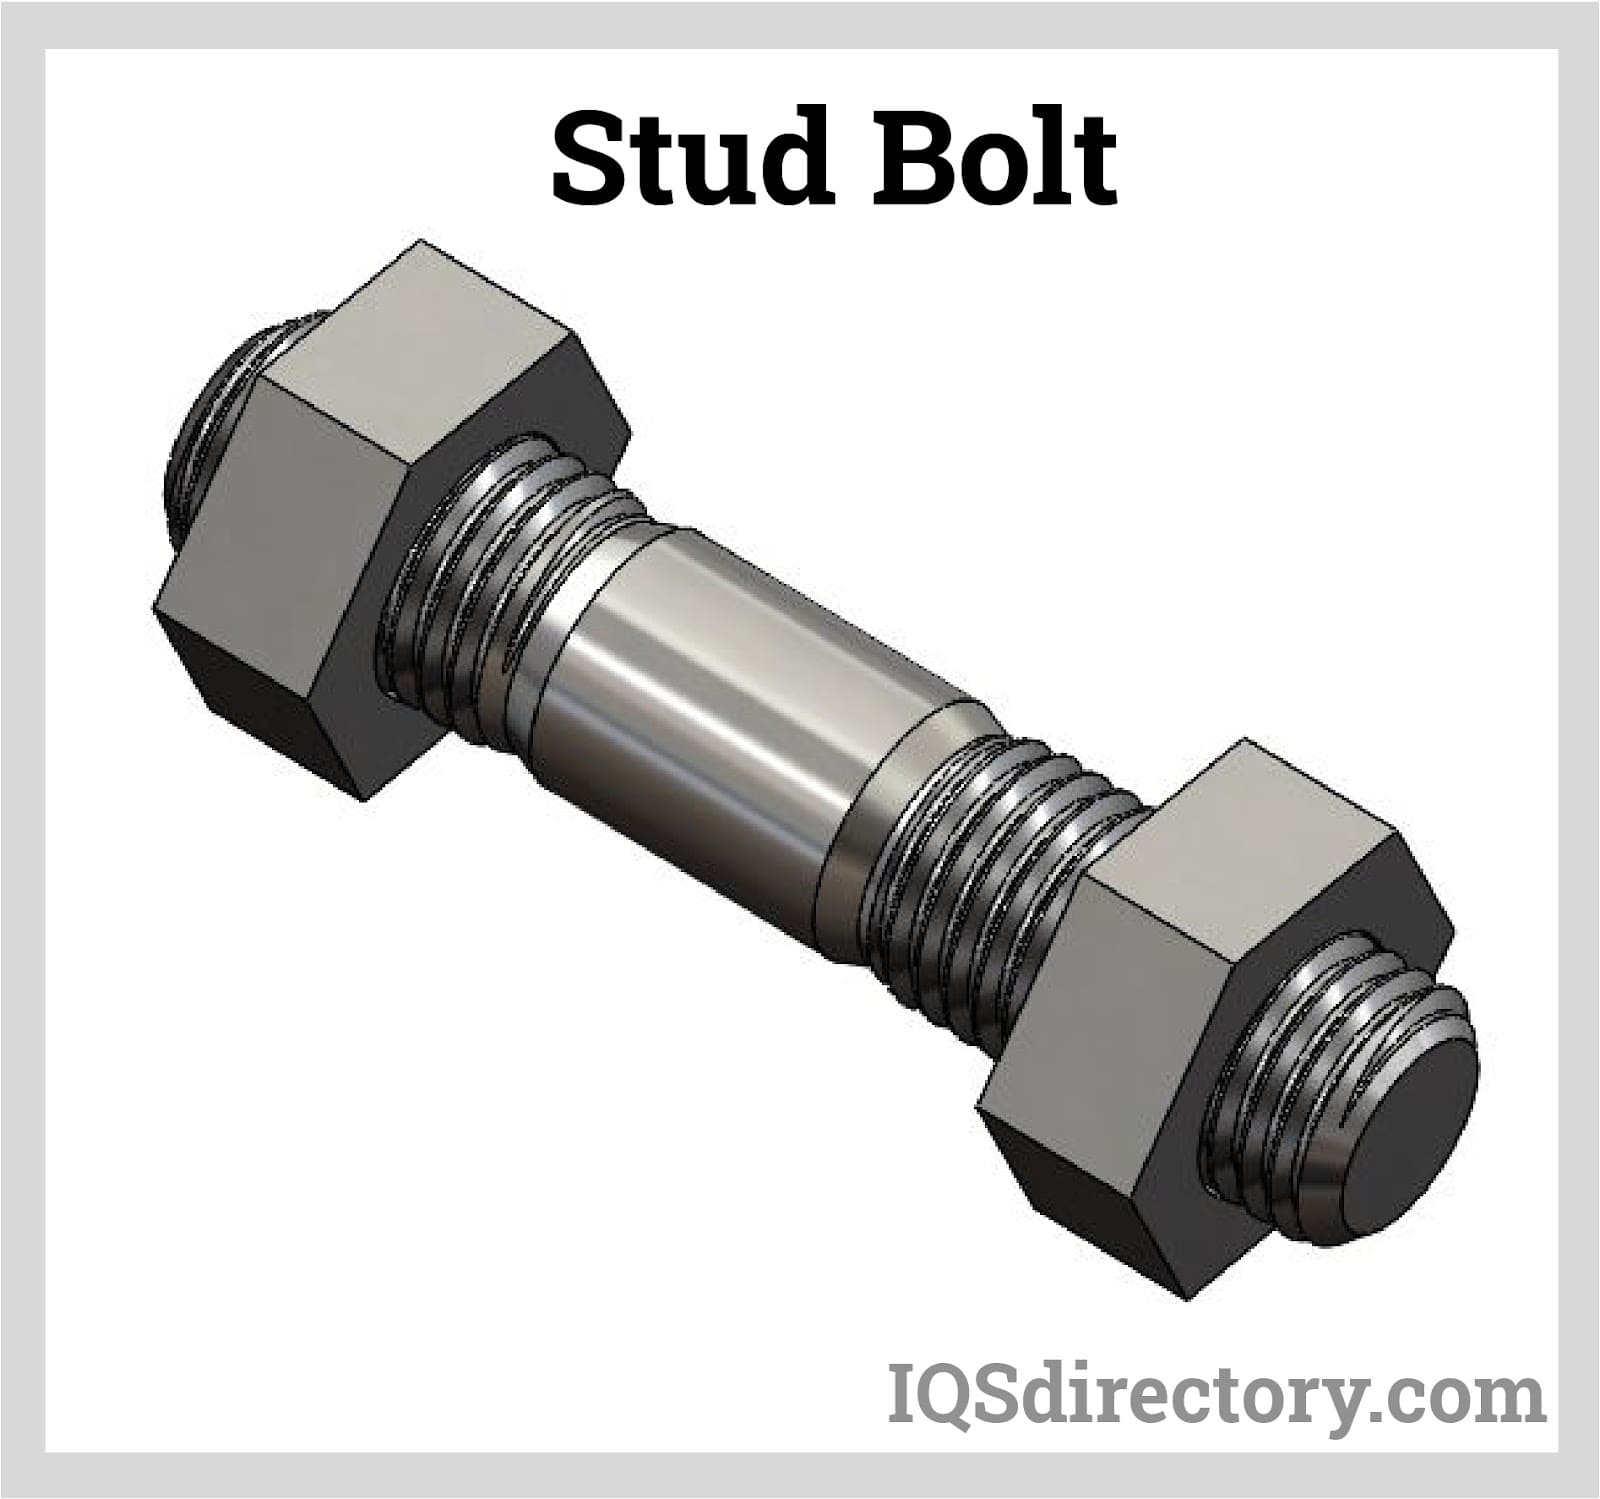 40+ Different Types of Bolts and Nuts and Washers (With Pictures)